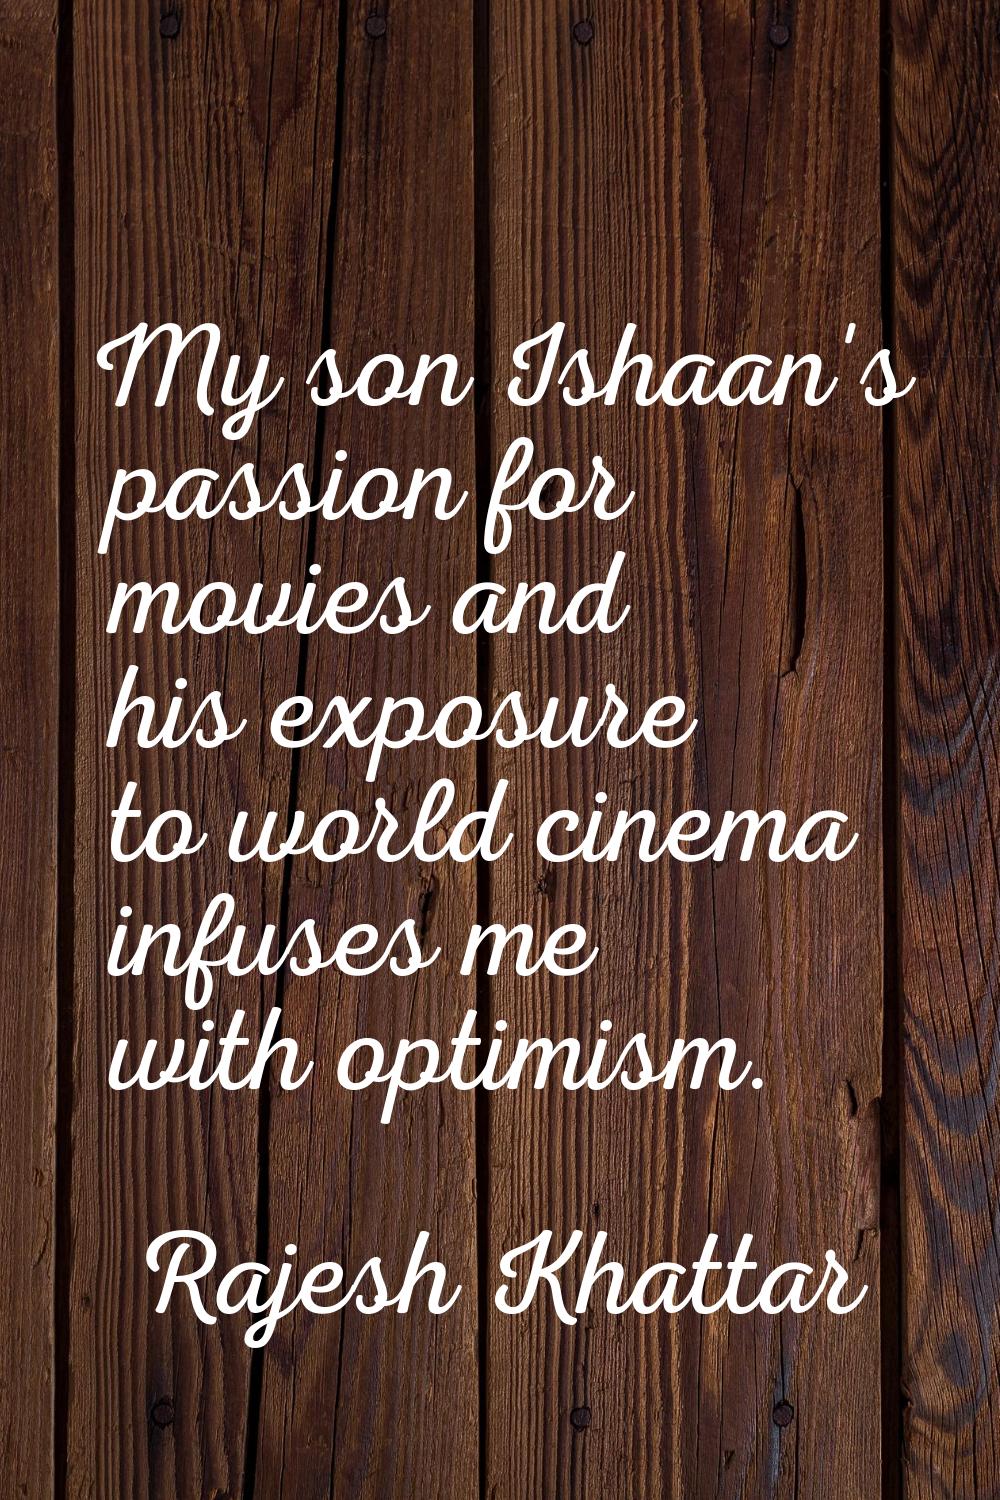 My son Ishaan's passion for movies and his exposure to world cinema infuses me with optimism.